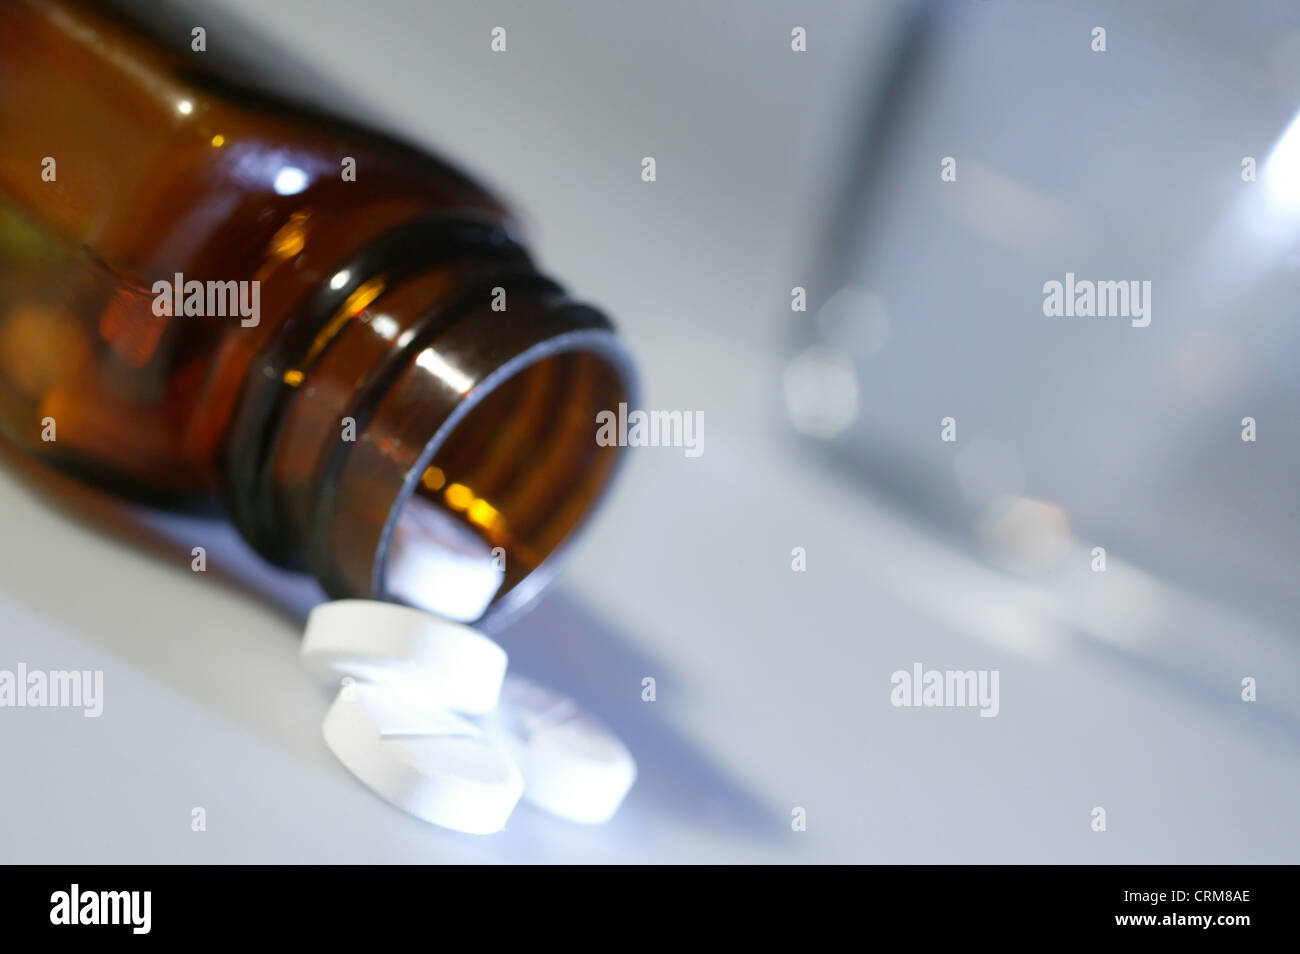 White paracetemol tablets spilling out of a brown bottle near a glass of water. Stock Photo